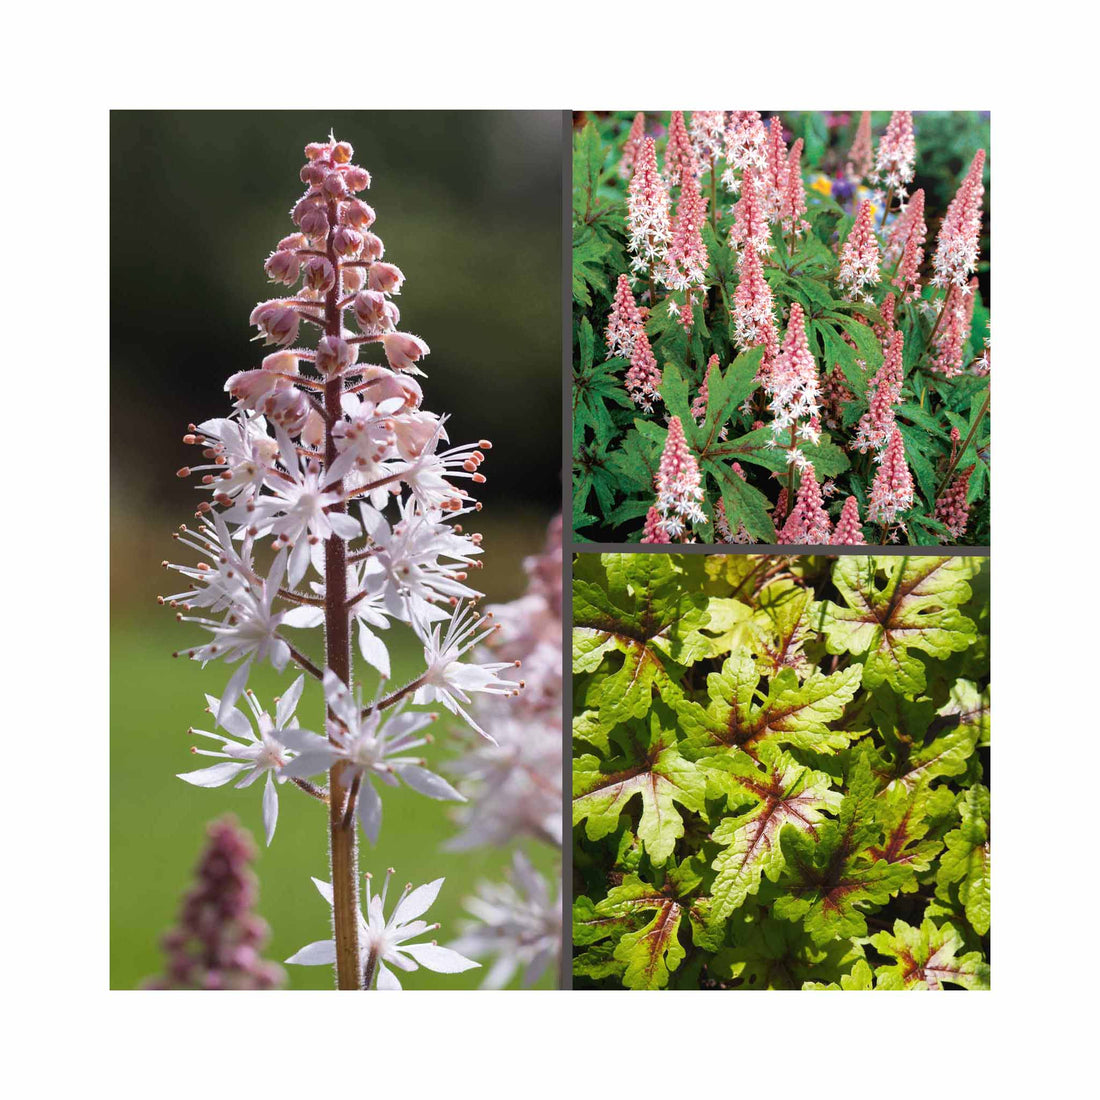 Collection of Tiarella plants and flowers